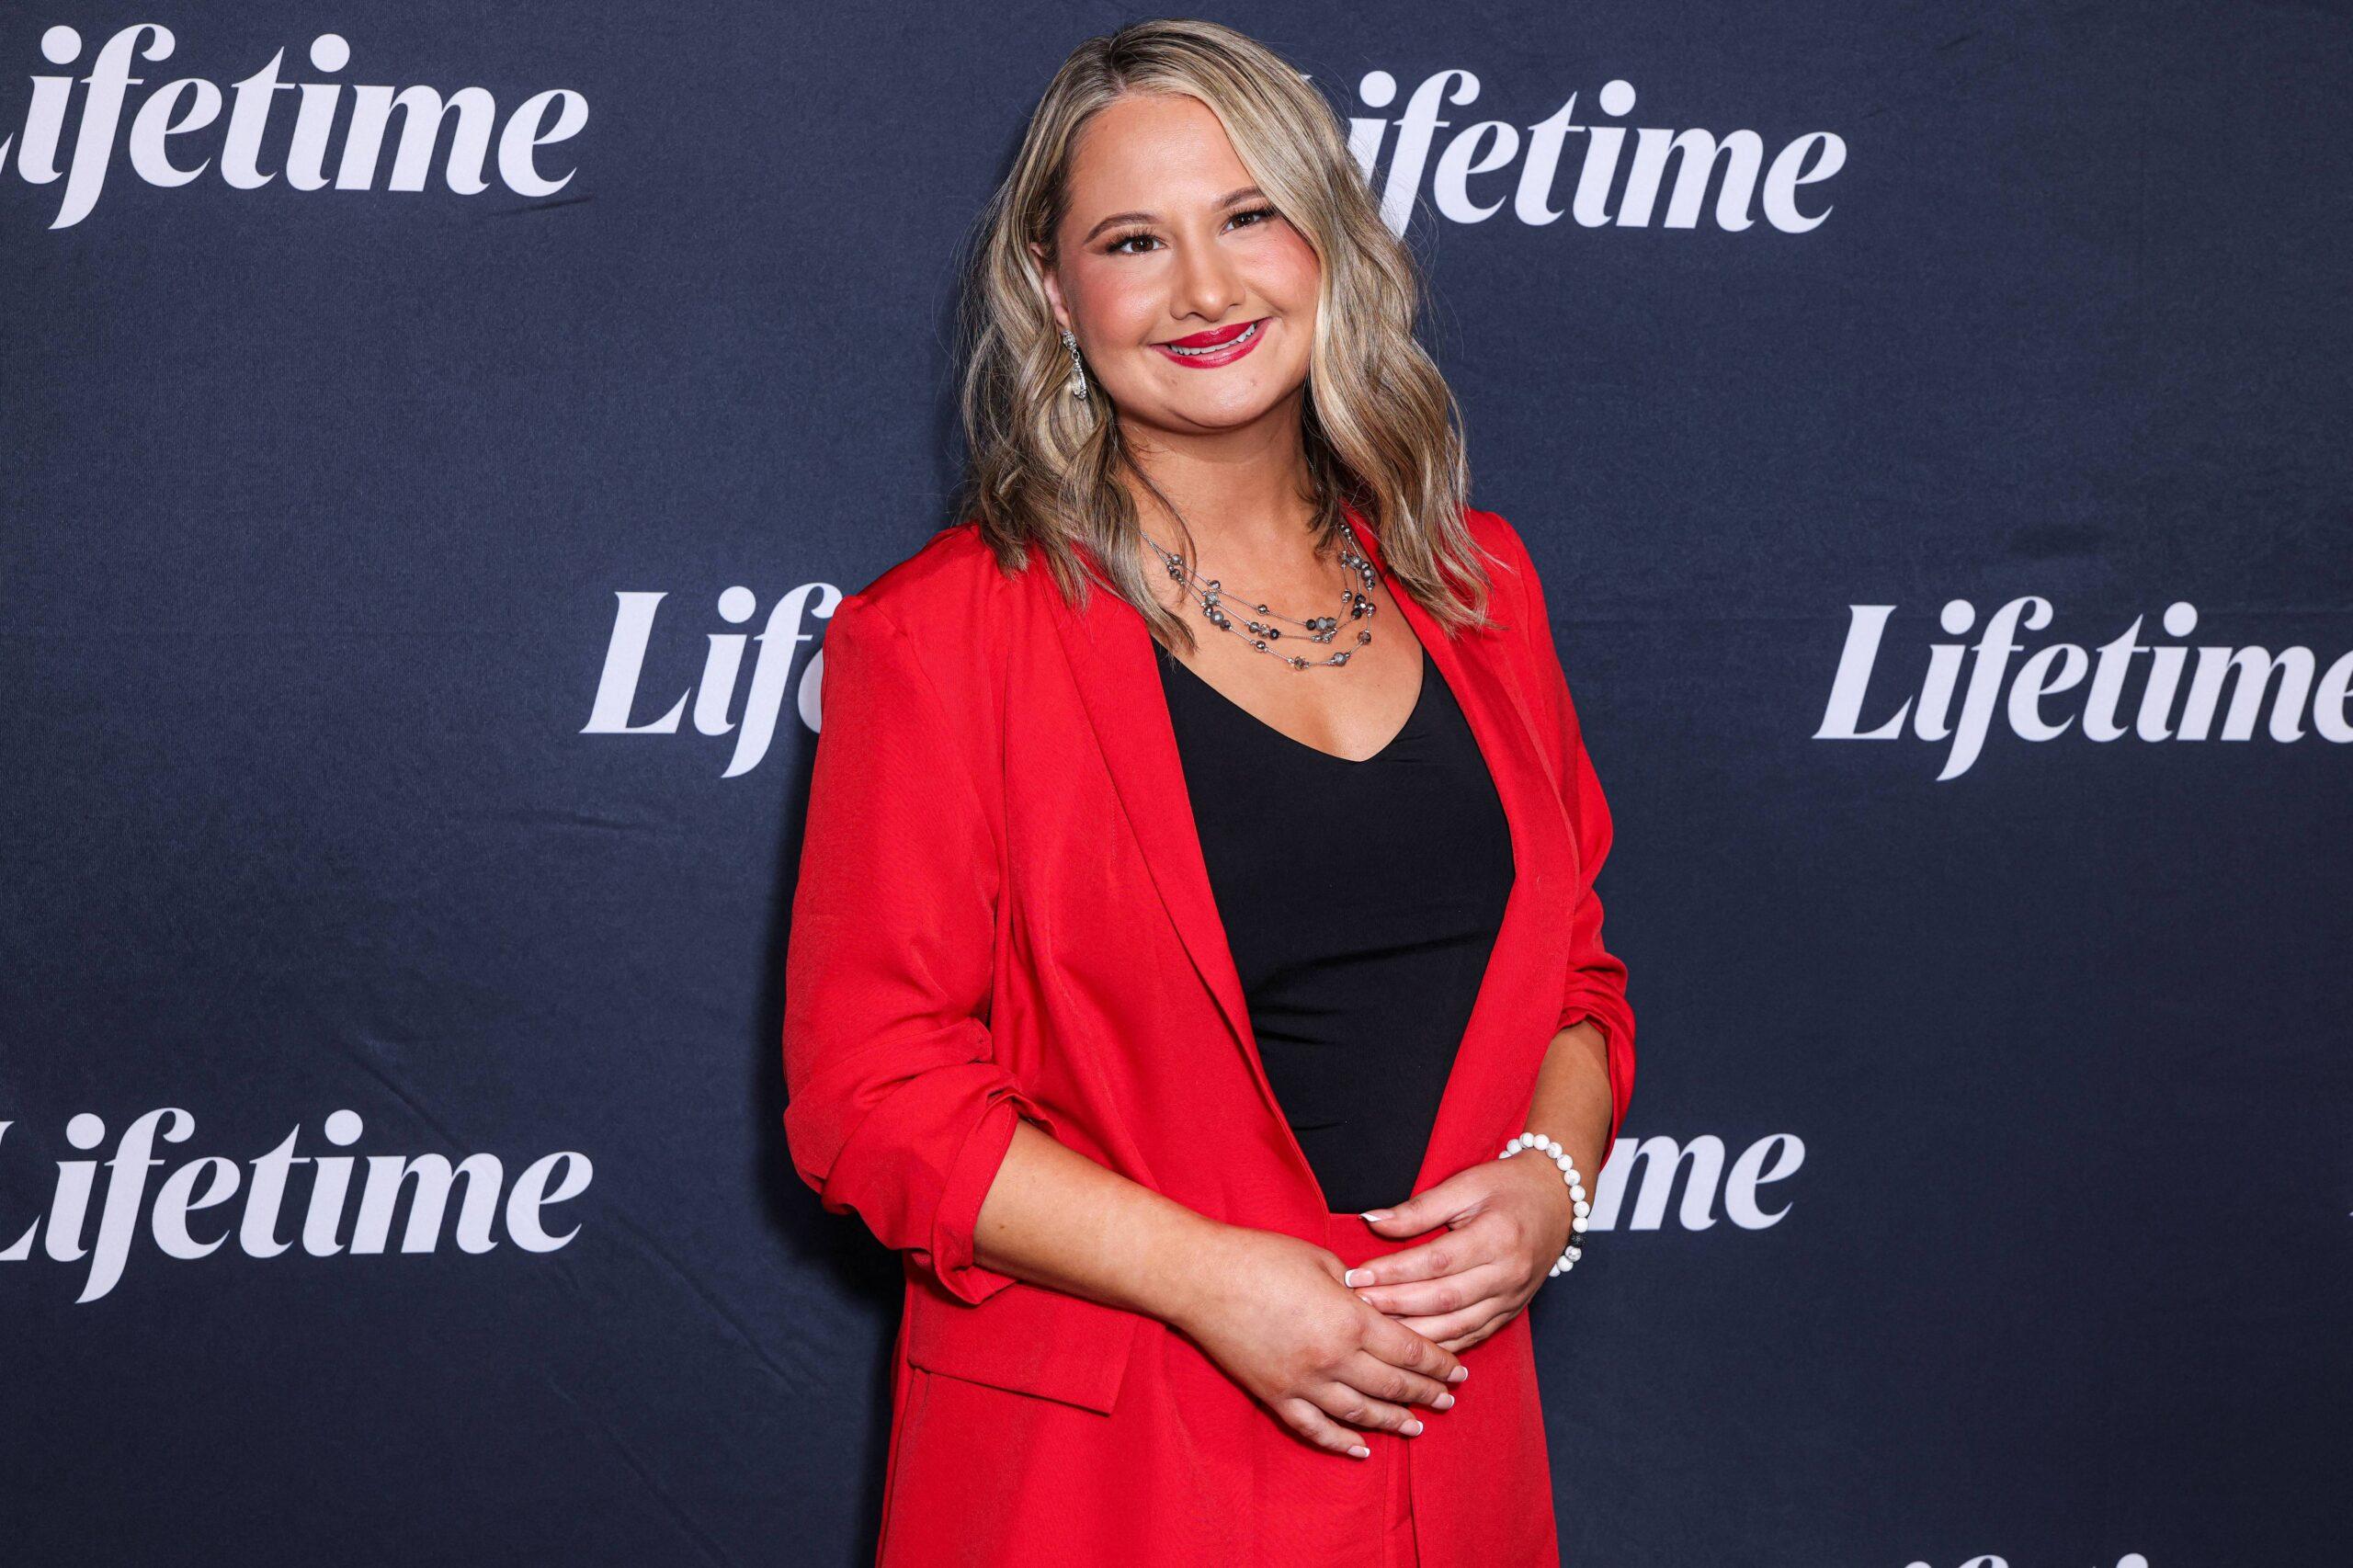 Gypsy Rose Blanchard in red blazer at An Evening With Lifetime: Conversations On Controversies FYC Event